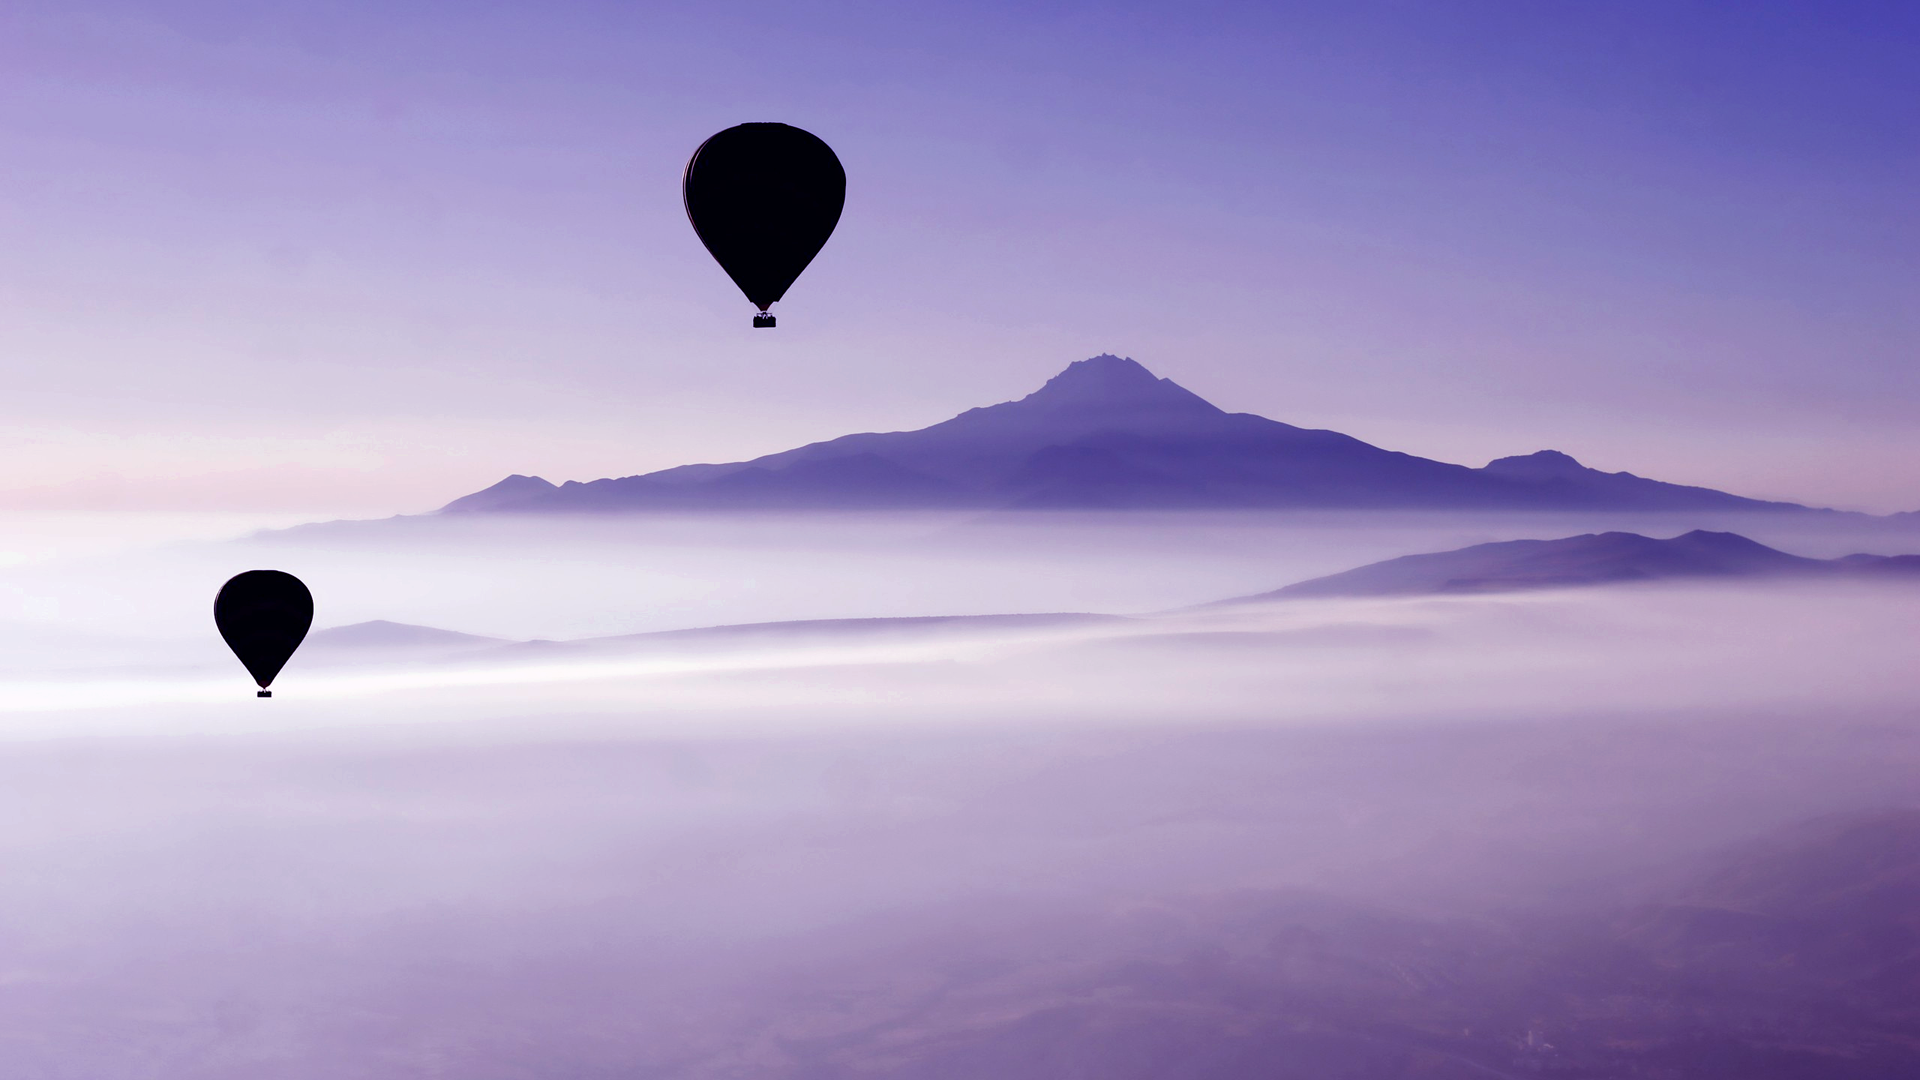 General 1920x1080 photography balloon mountains landscape mist vehicle nature sky